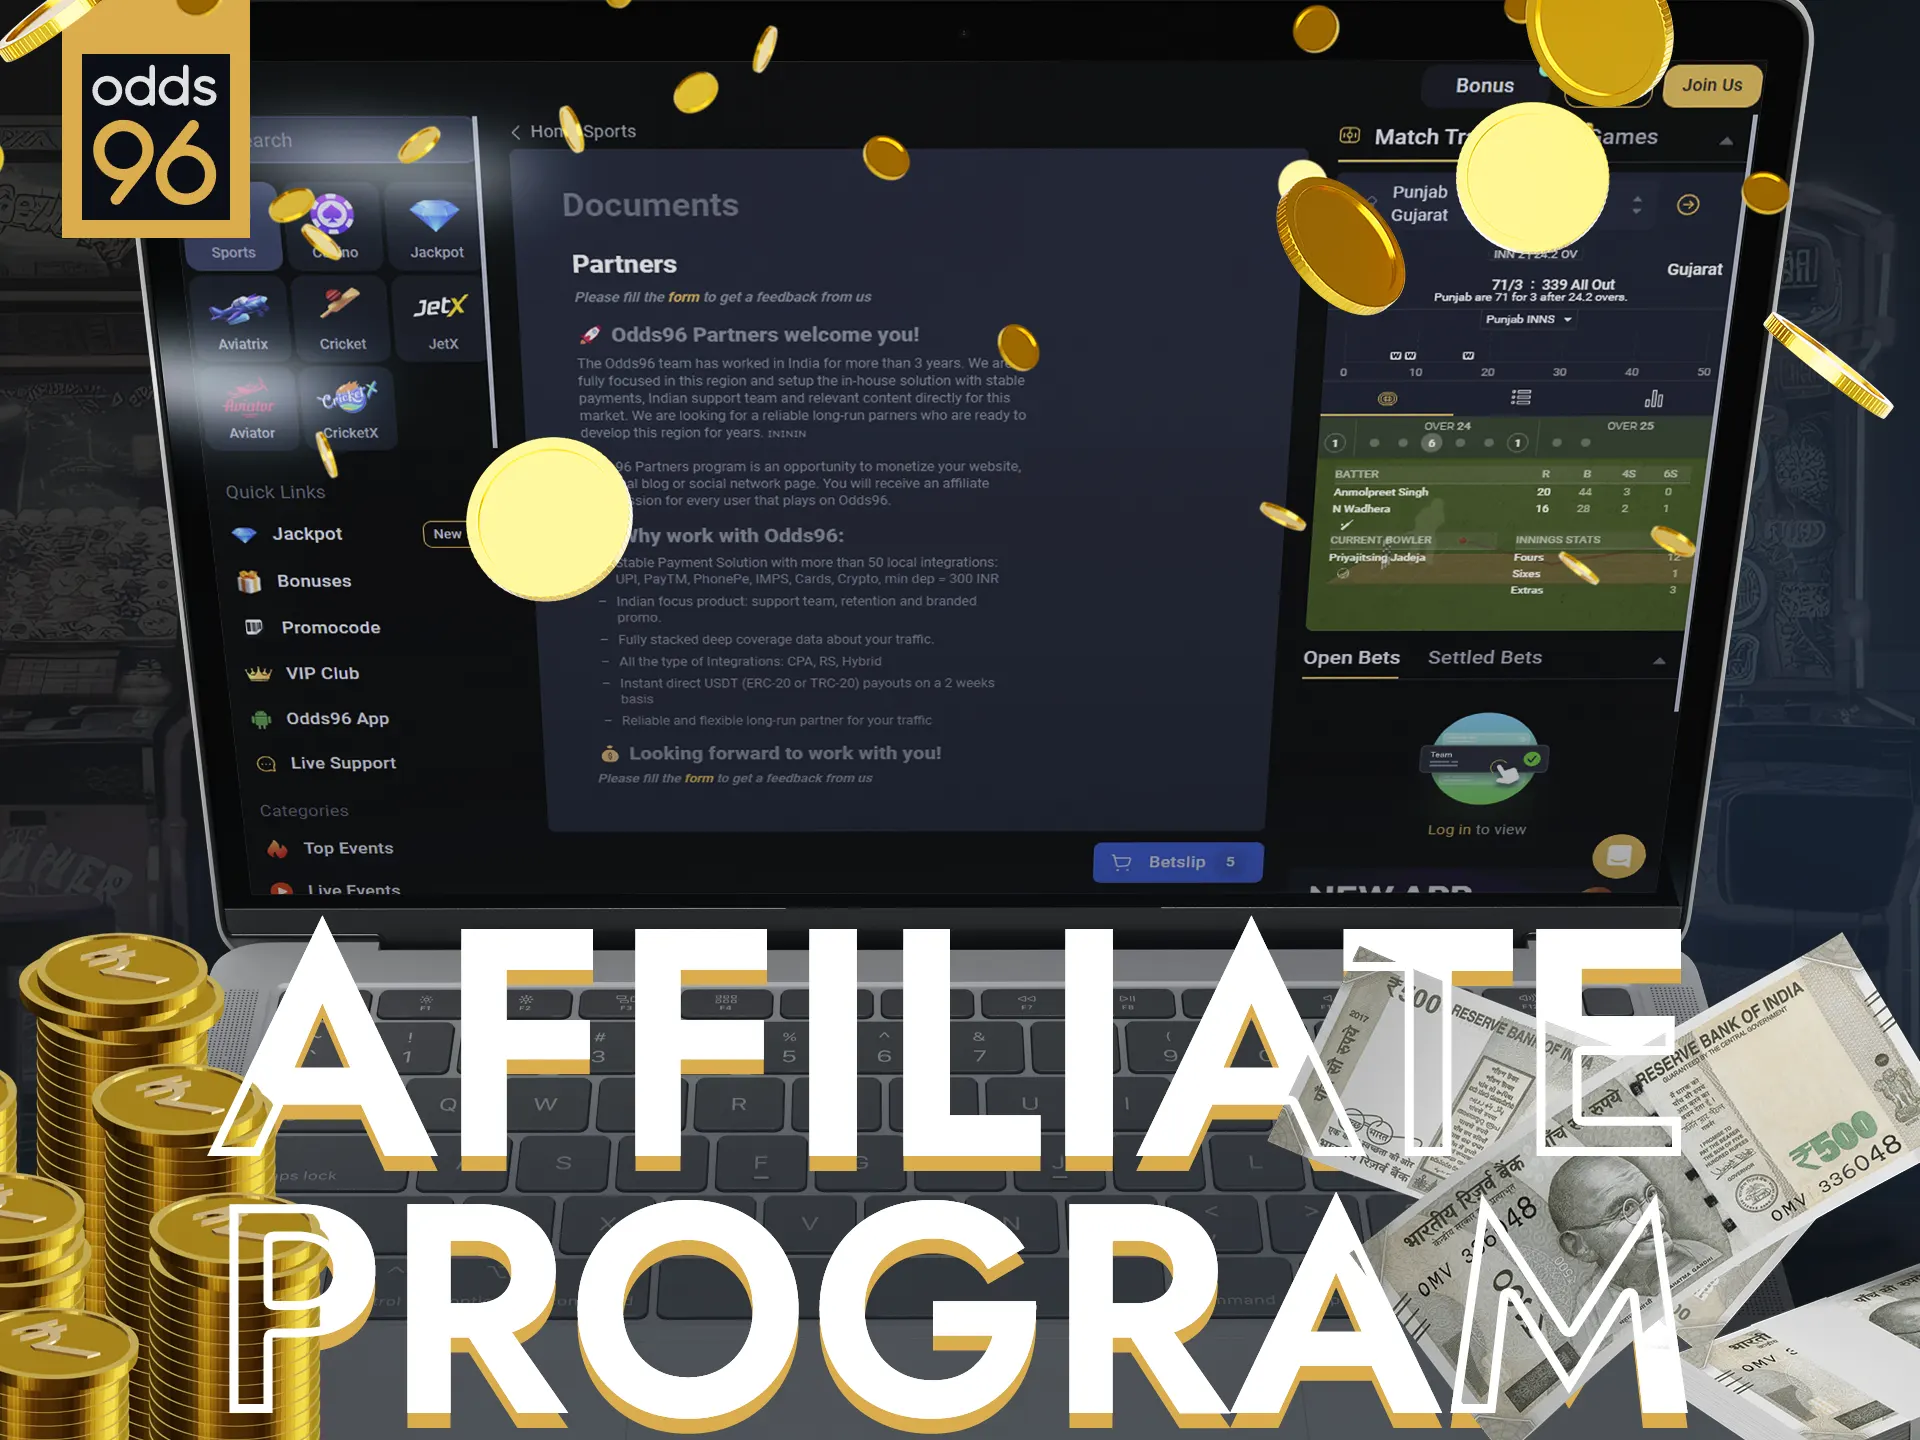 Join Odds96 affiliate program and earn commissions.